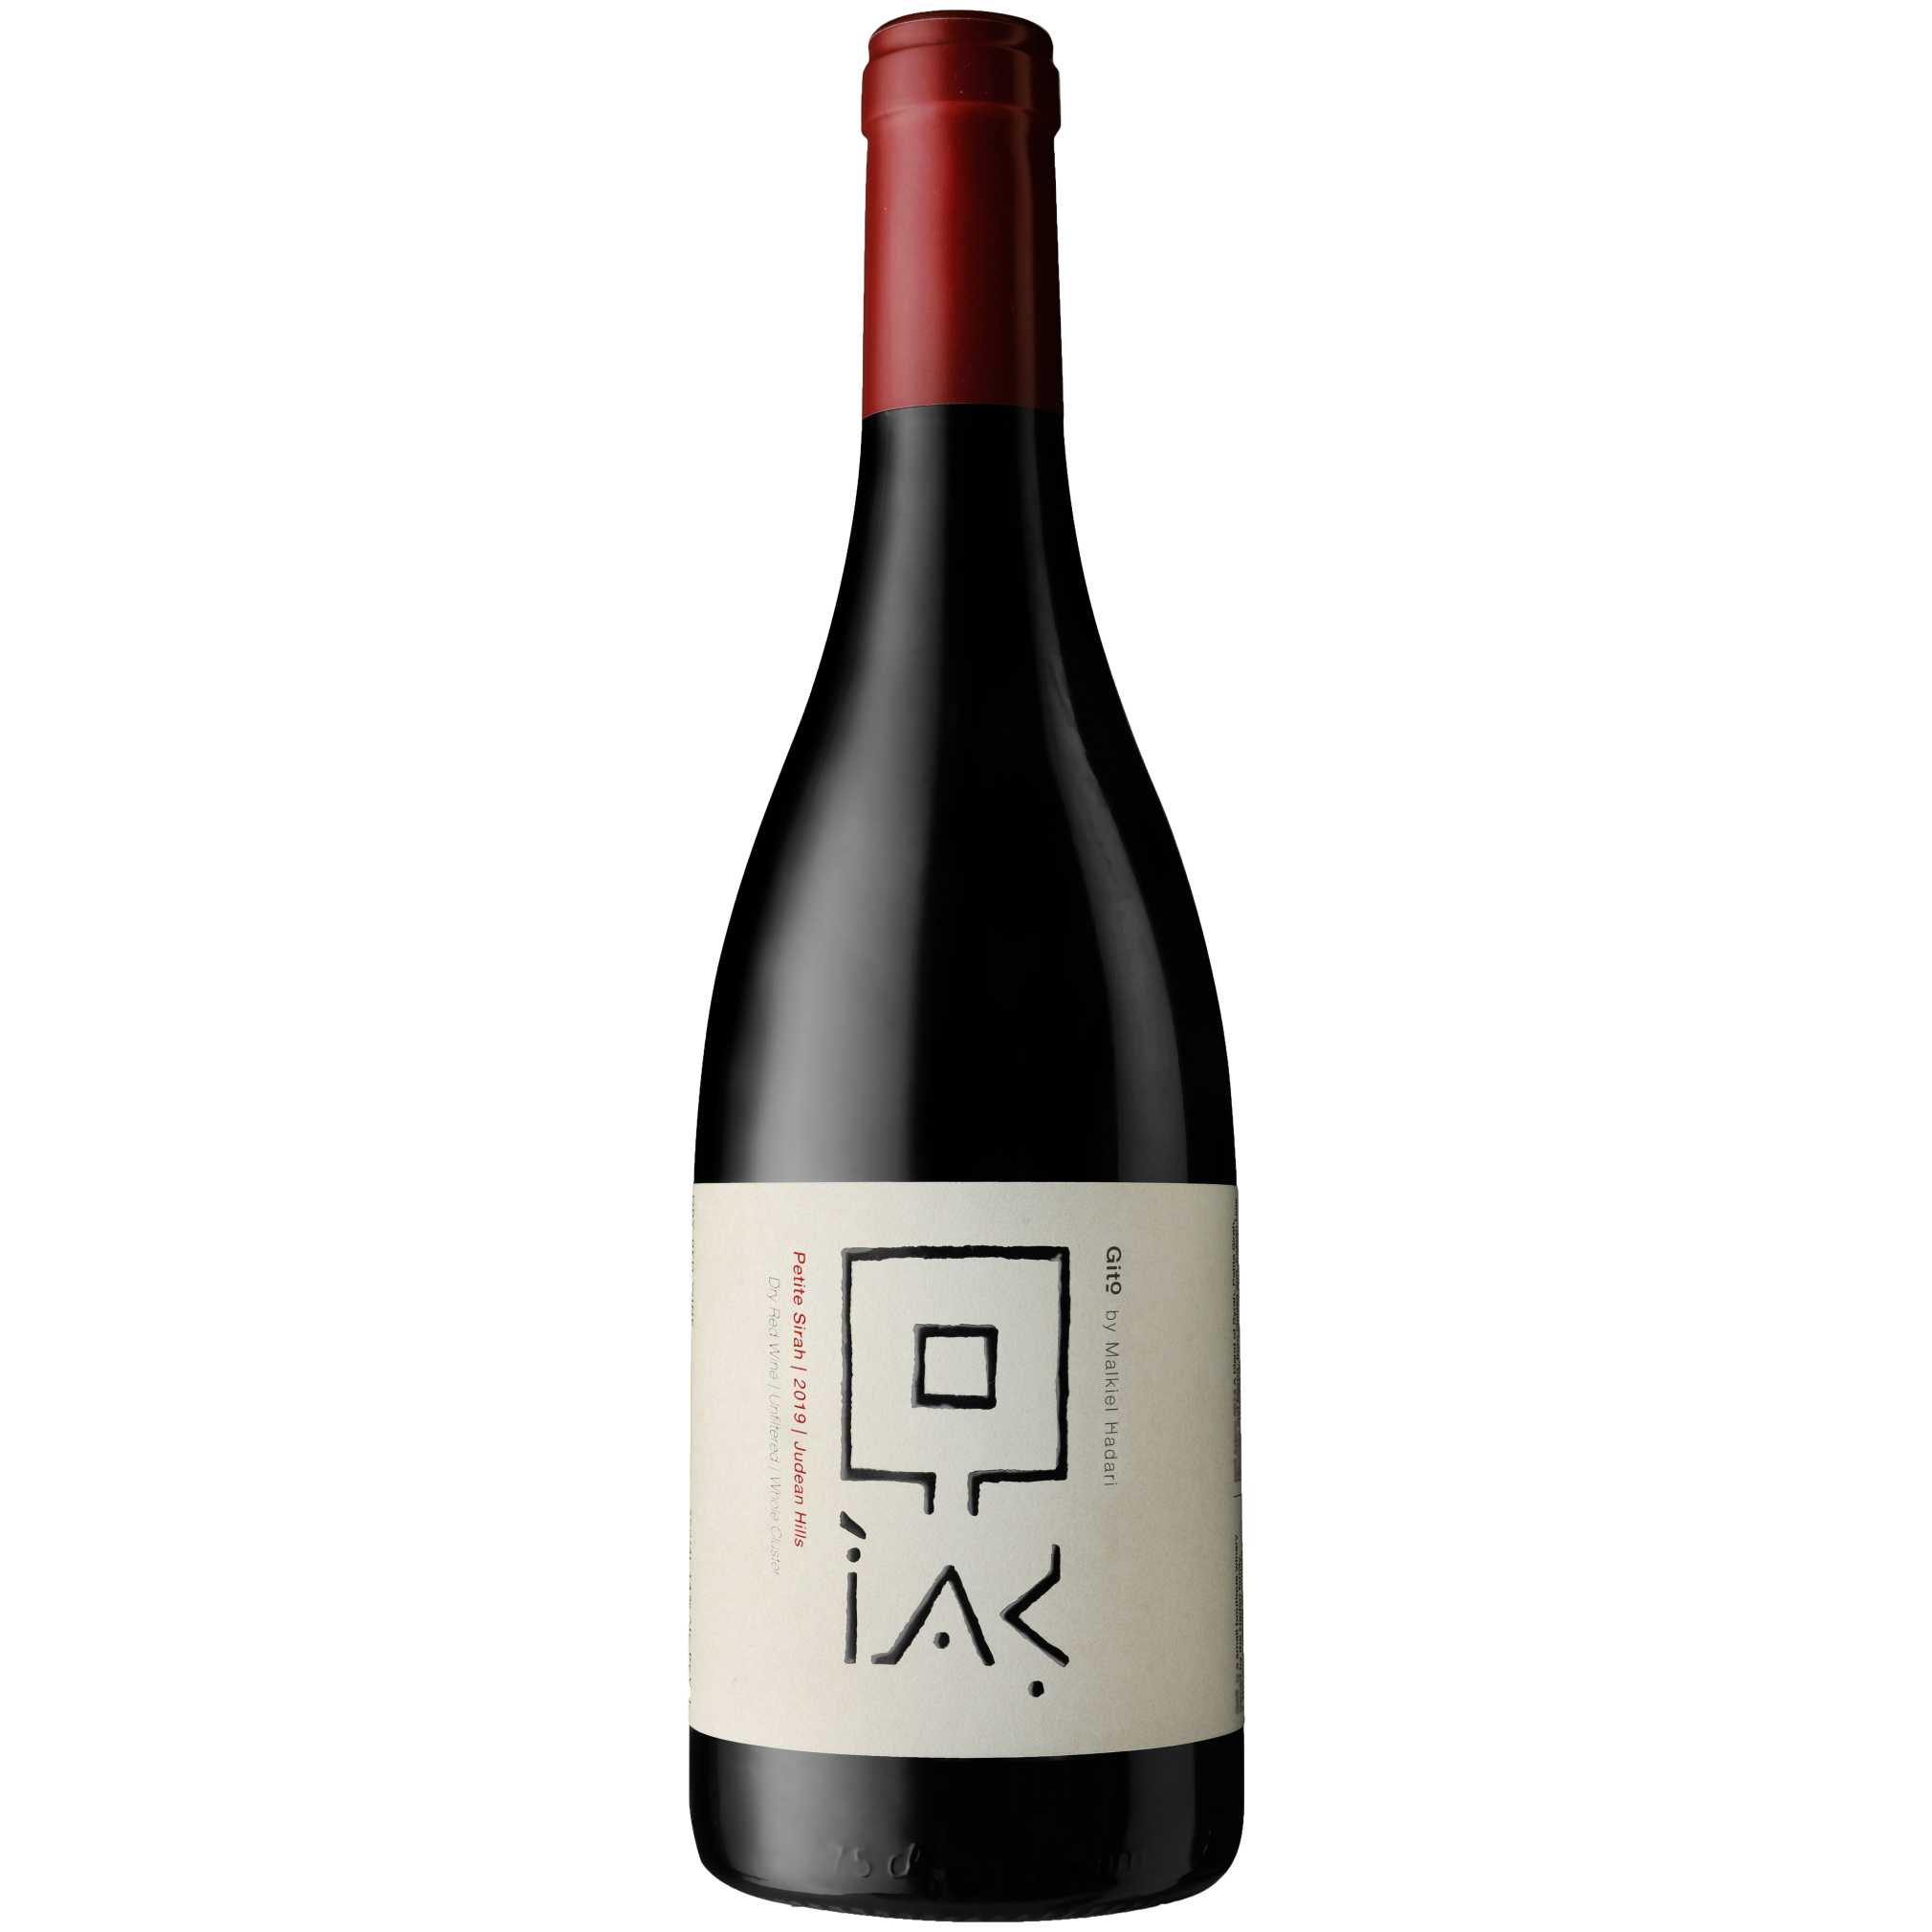 Gito Whole Cluster Petite Sirah - A Kosher Wine From Israel